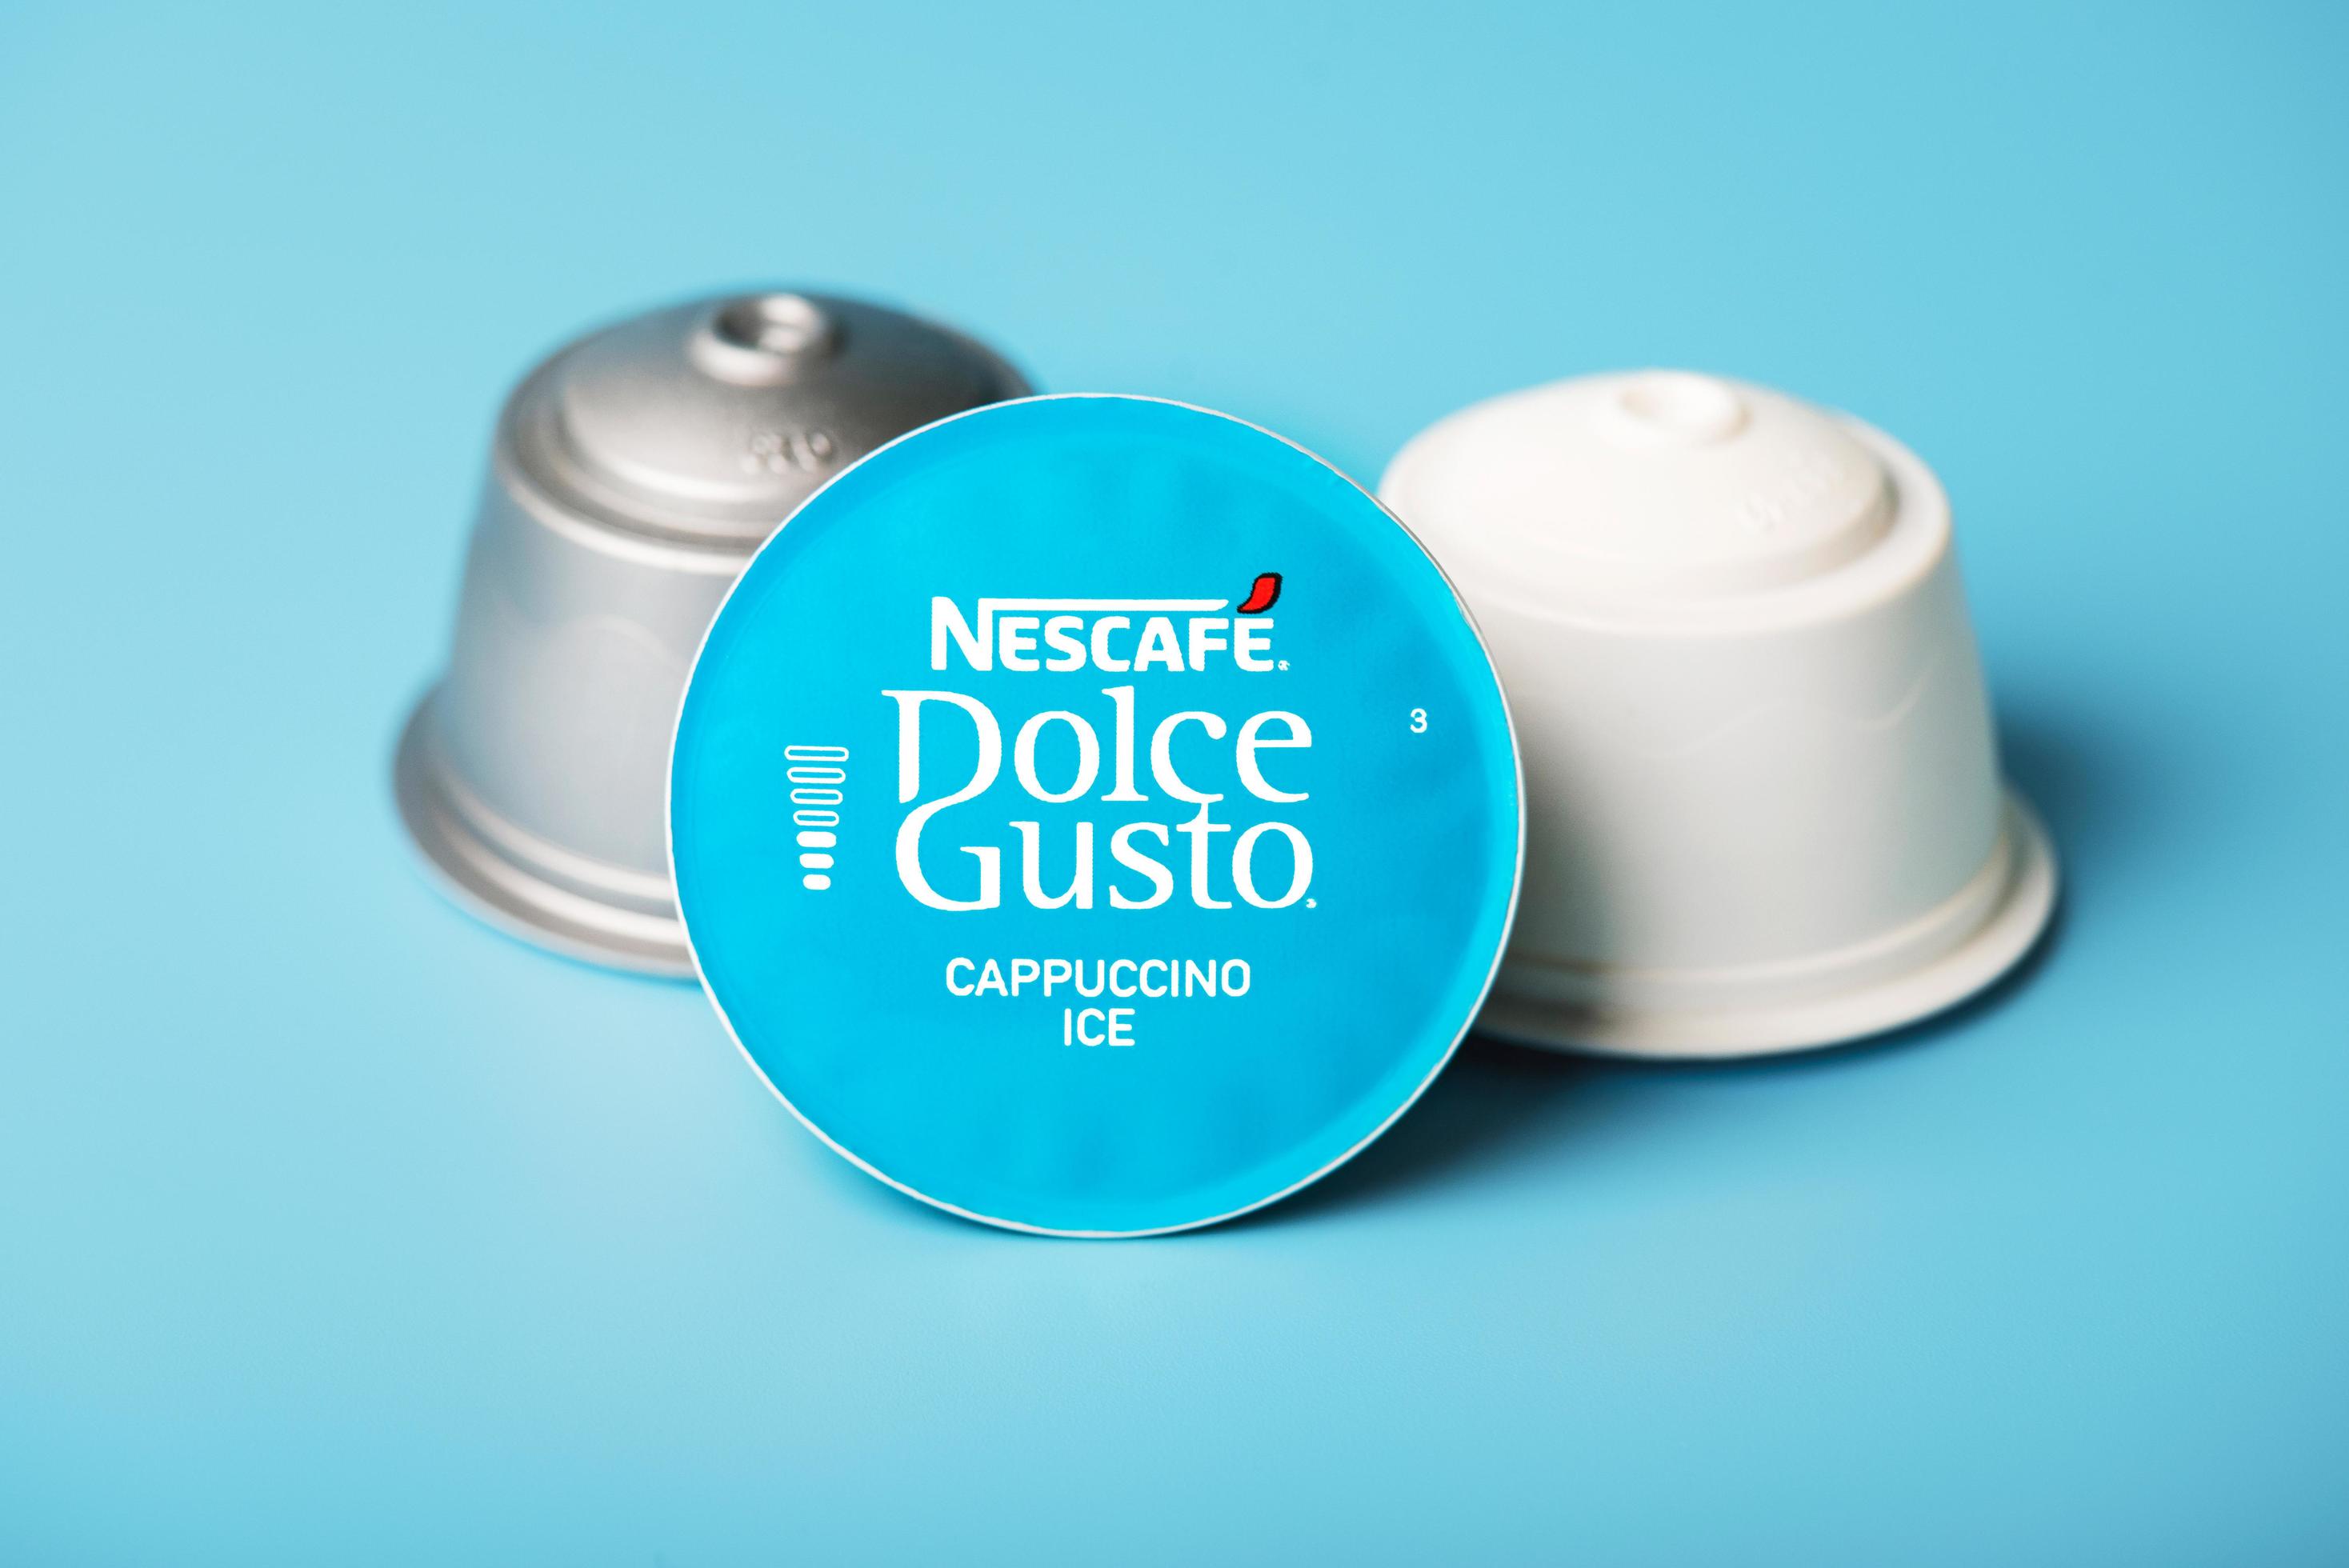 https://static.vecteezy.com/system/resources/previews/006/156/180/large_2x/closeup-of-nescafe-dolce-gusto-capsule-cappuccino-ice-selective-focus-free-photo.jpg